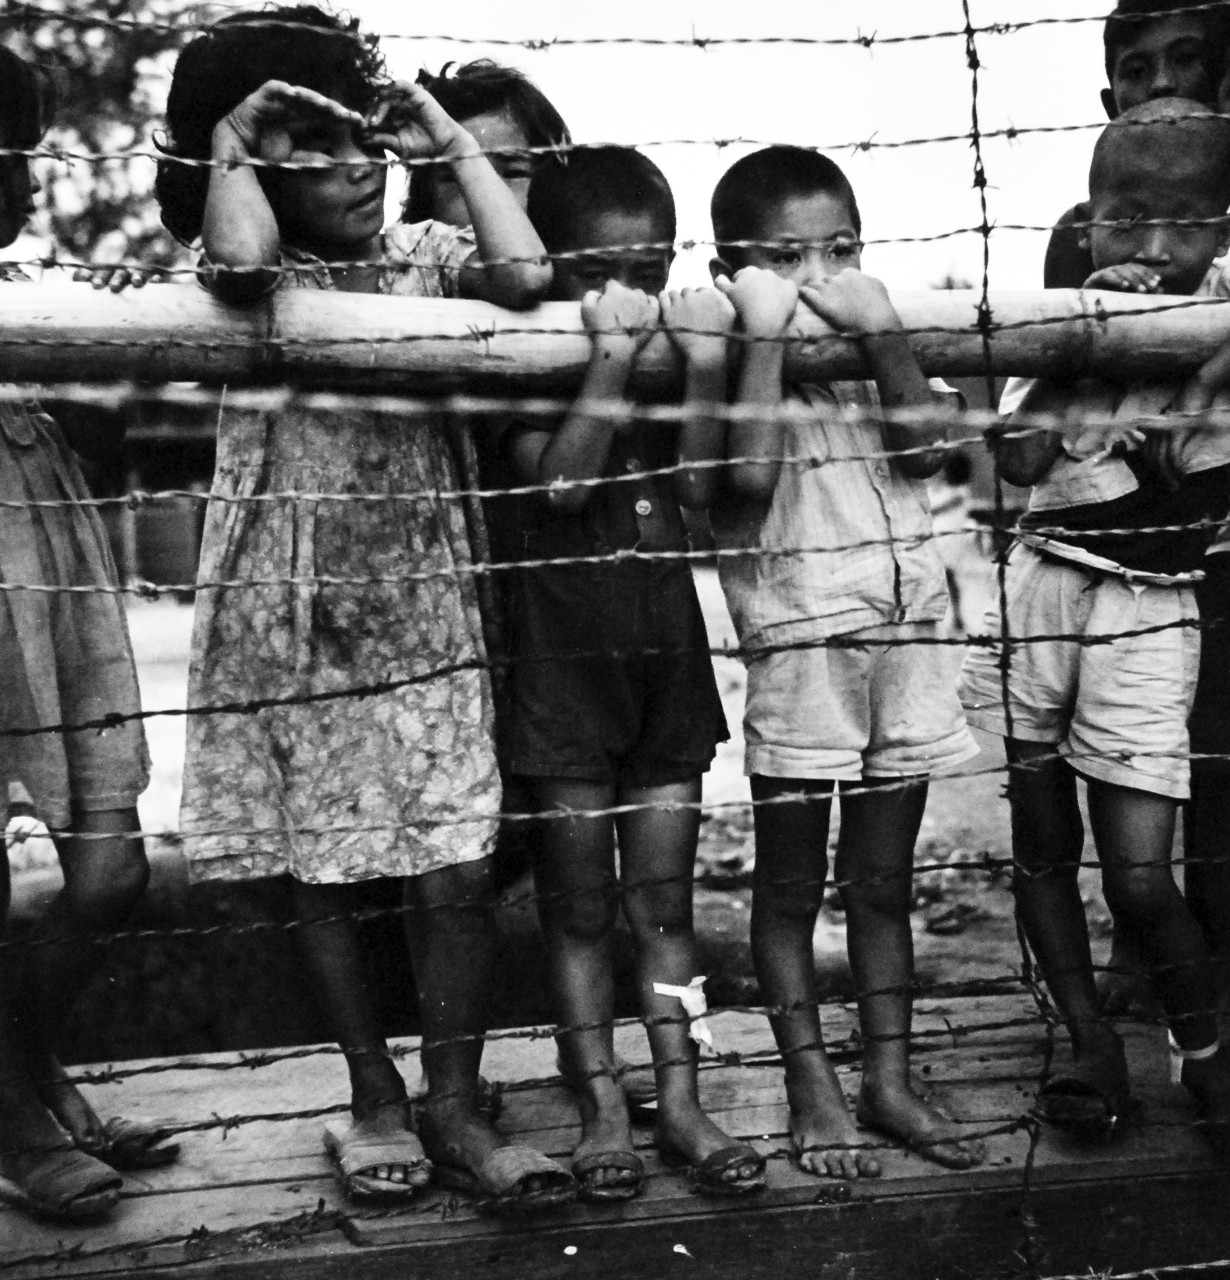 80-G-476063:  Invasion of Guam, July 21-August 10, 1944. Children of Japanese sympathizers in prison stockade on Guam.    Photographed by Lieutenant Wayne Miller, November 1944, TR-11700.     Official U.S. Navy photograph, now in the collections of the National Archives.   (2017/03/15).